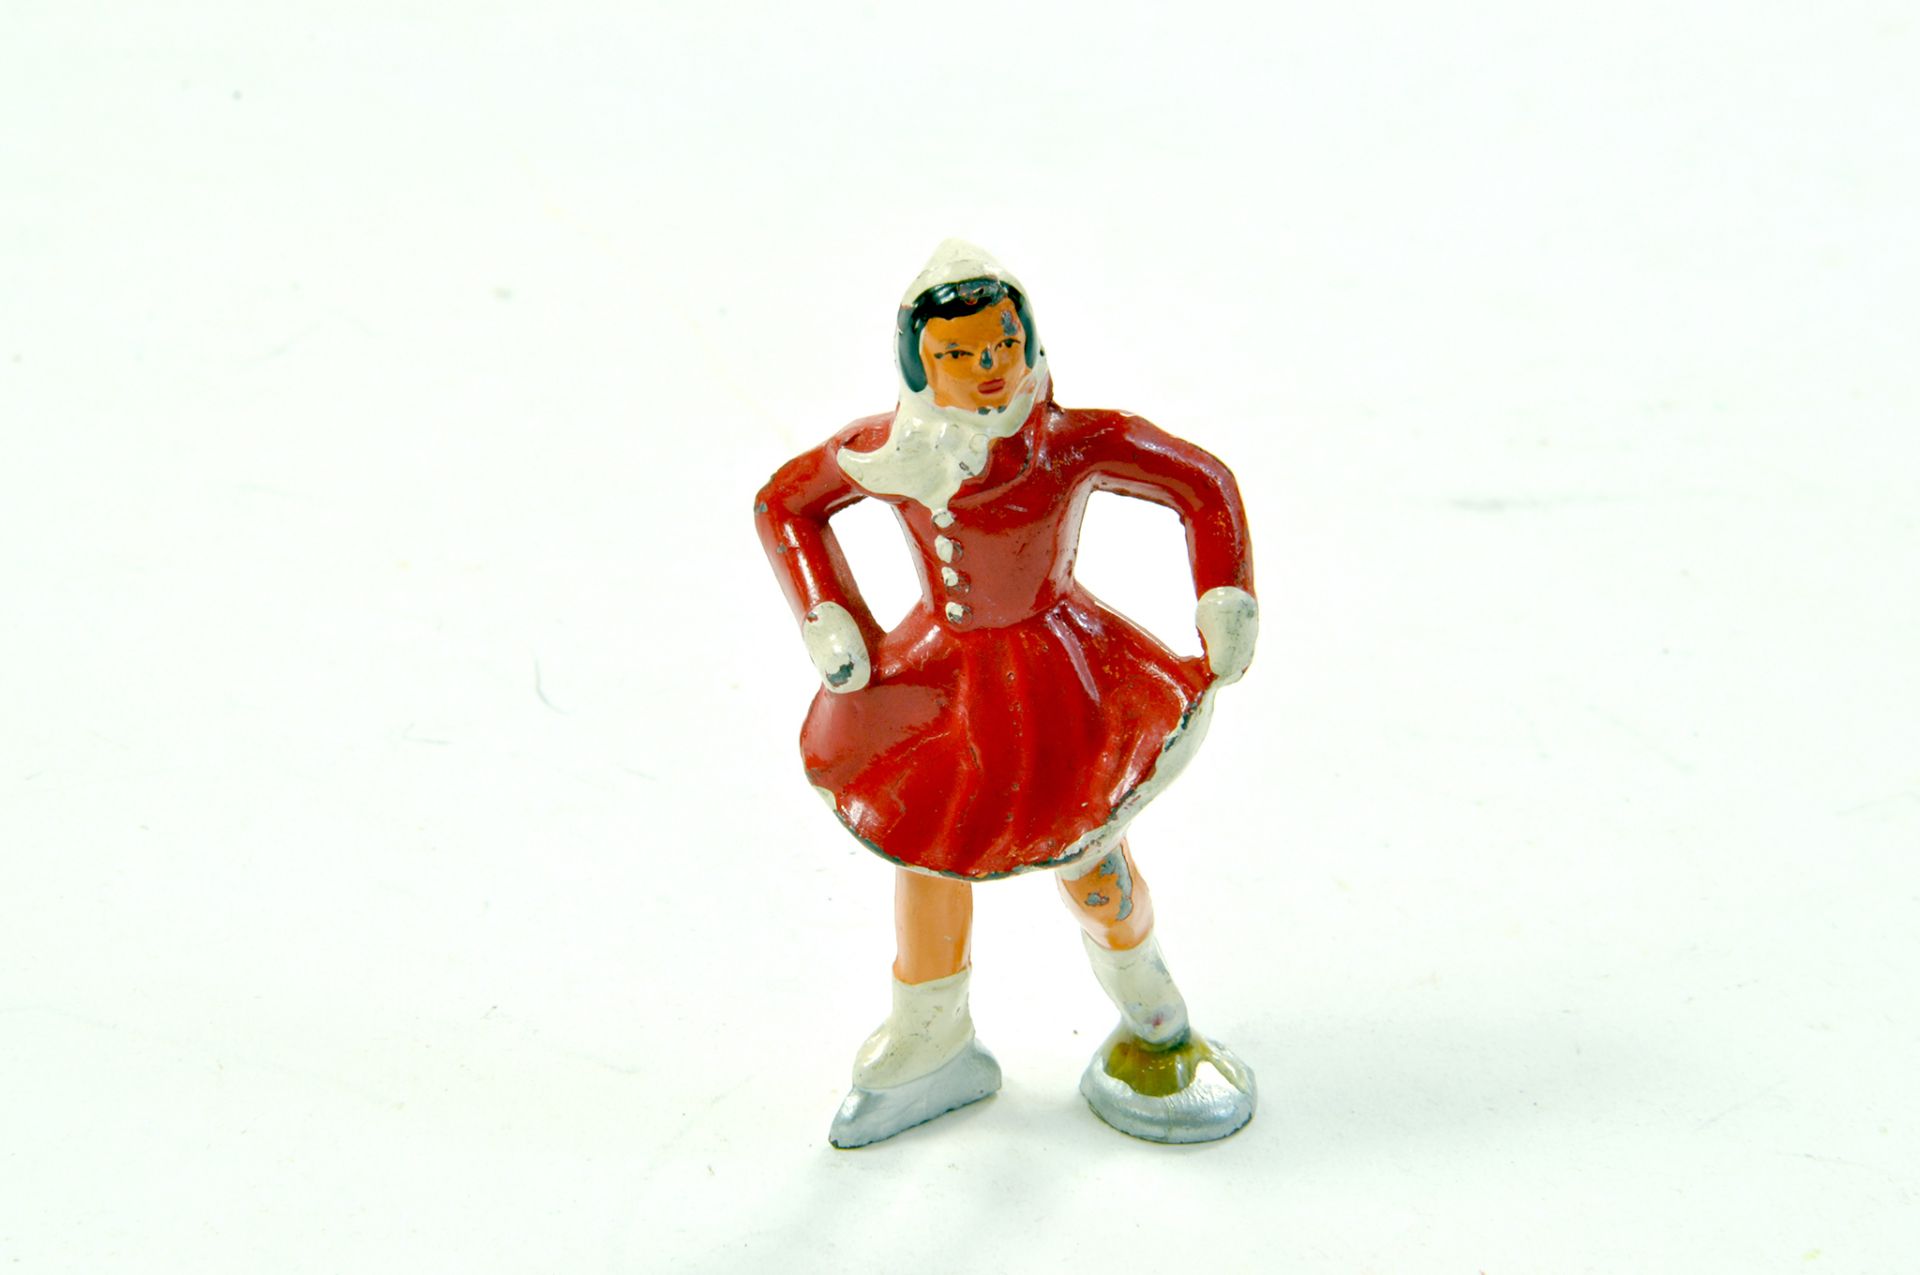 Barclay metal figure of a Woman Ice Skater. Generally good to very good, some paint loss. Enhanced